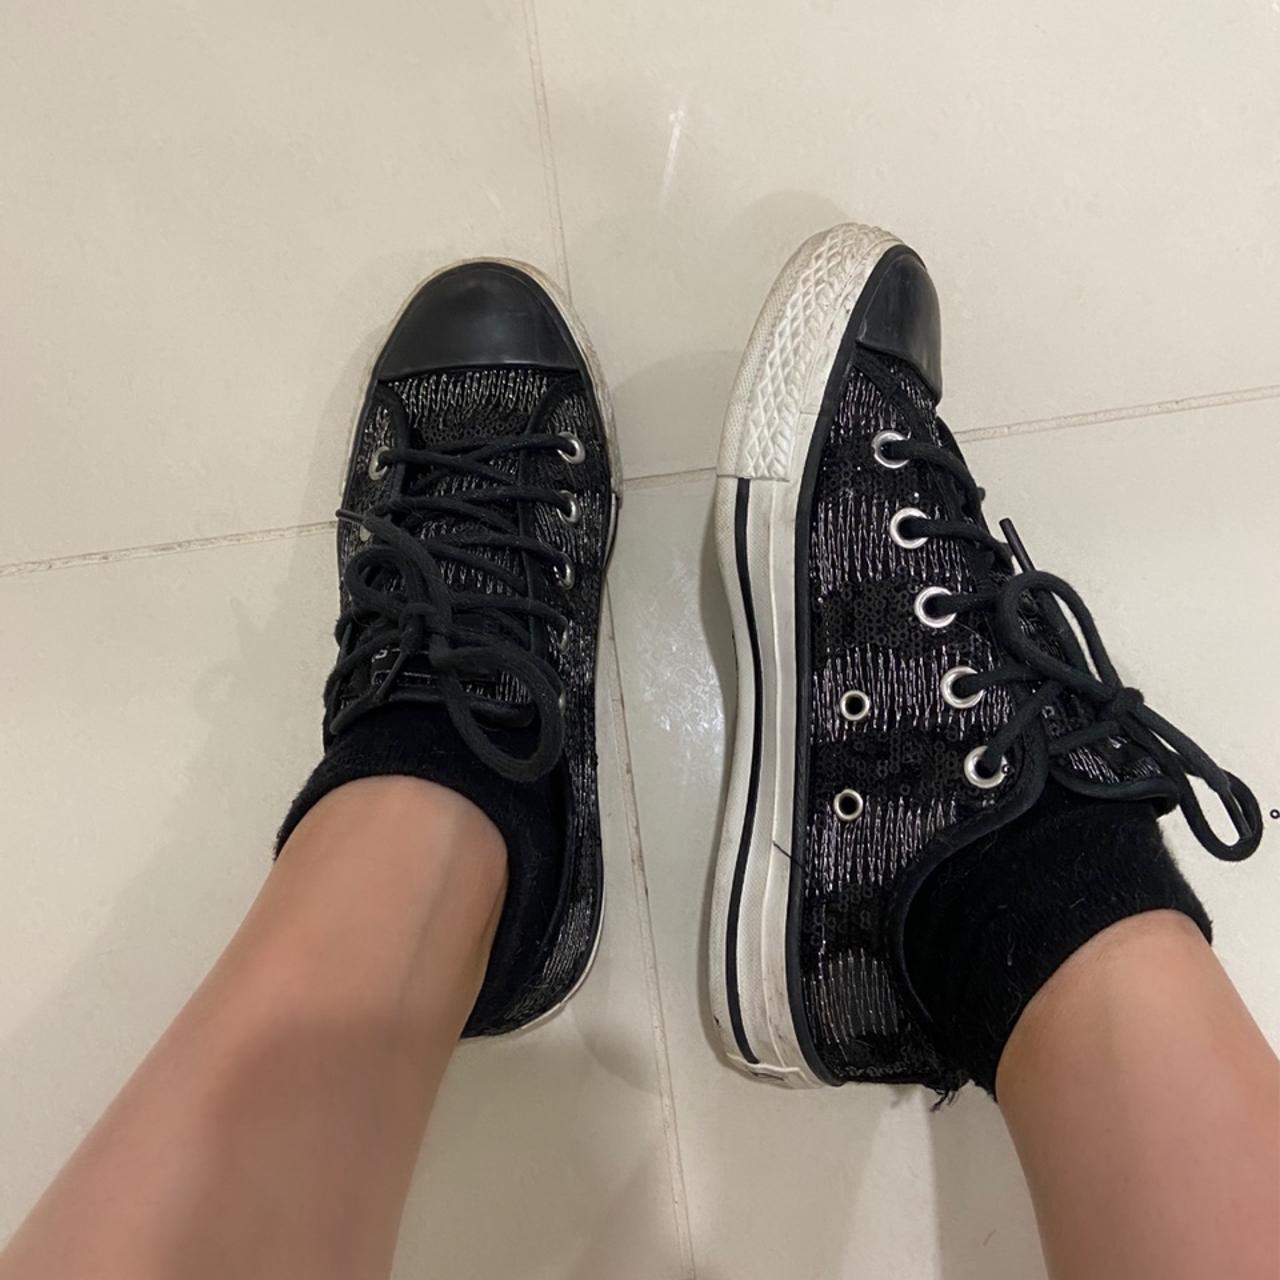 Converse Women's Black and Silver Trainers | Depop